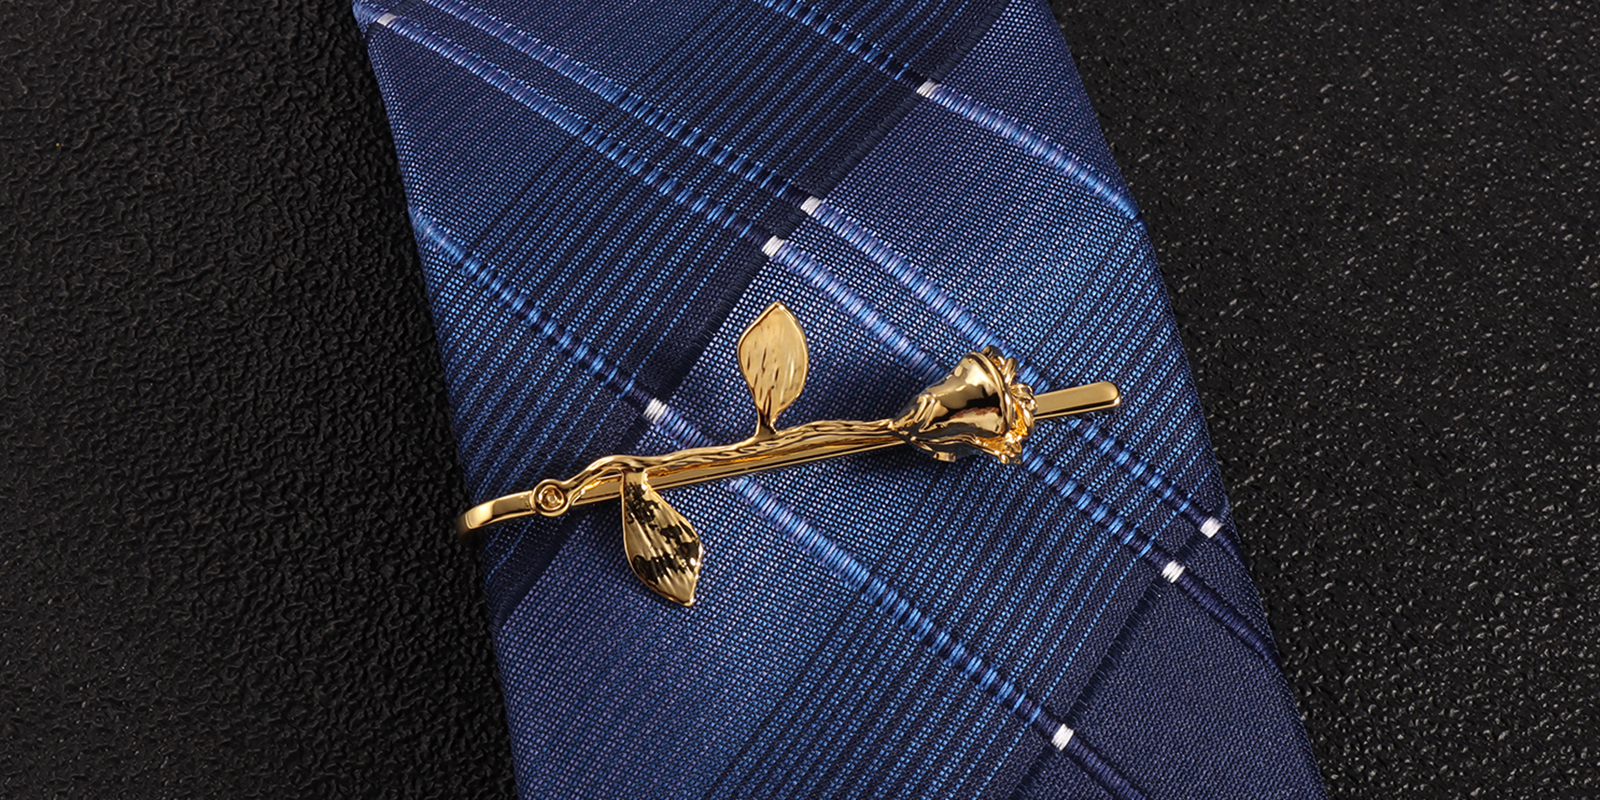 What Materials Are 2-inch Tie Clips Made Of?